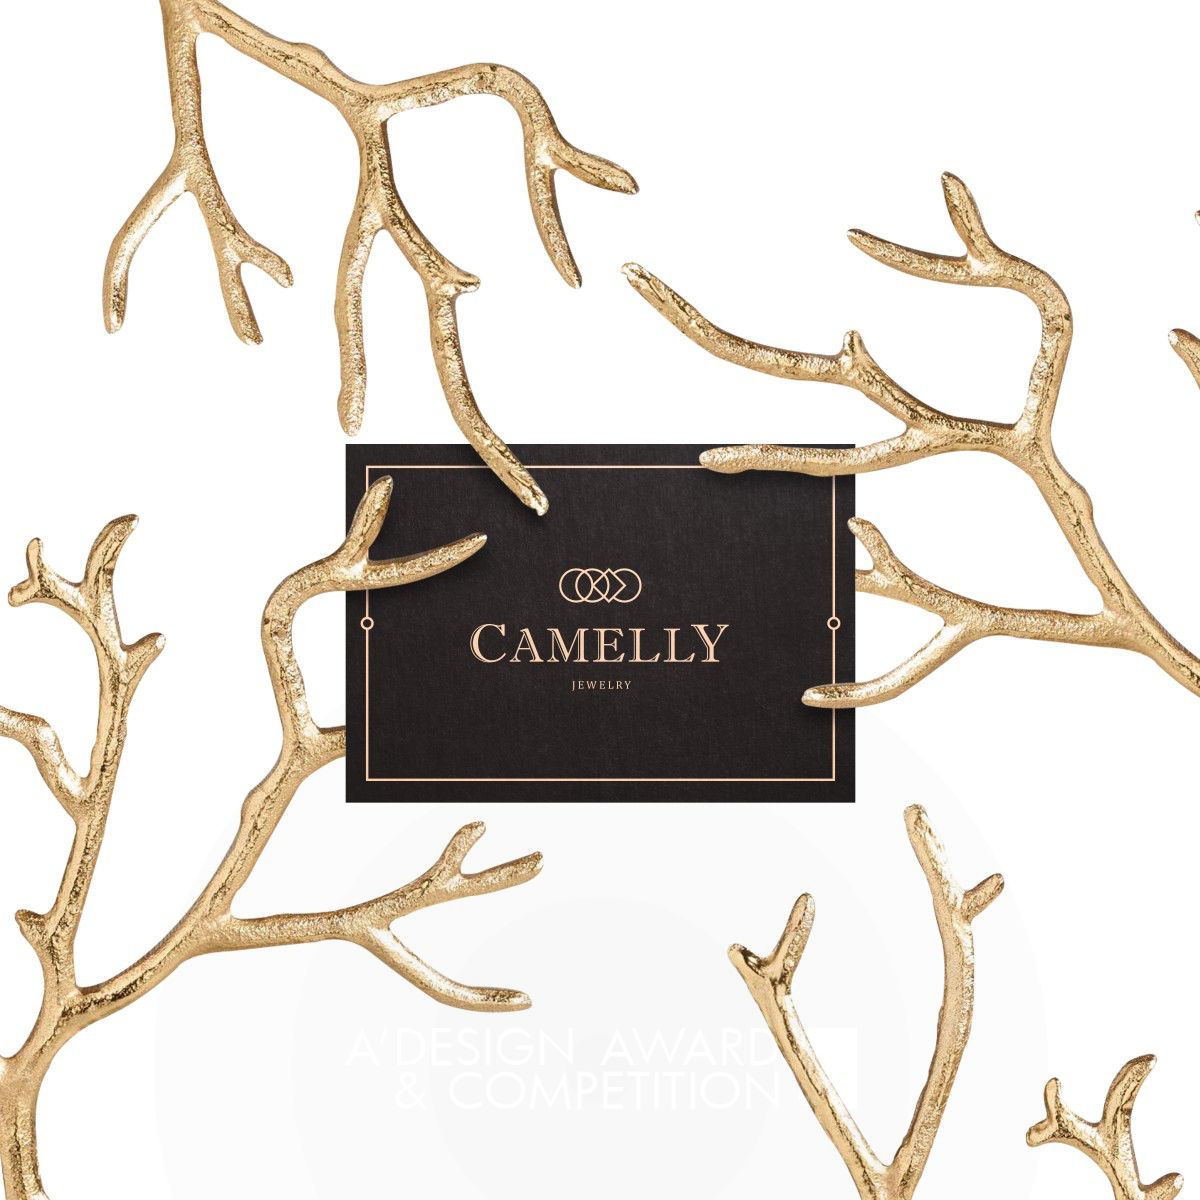 Camelly Jewelry